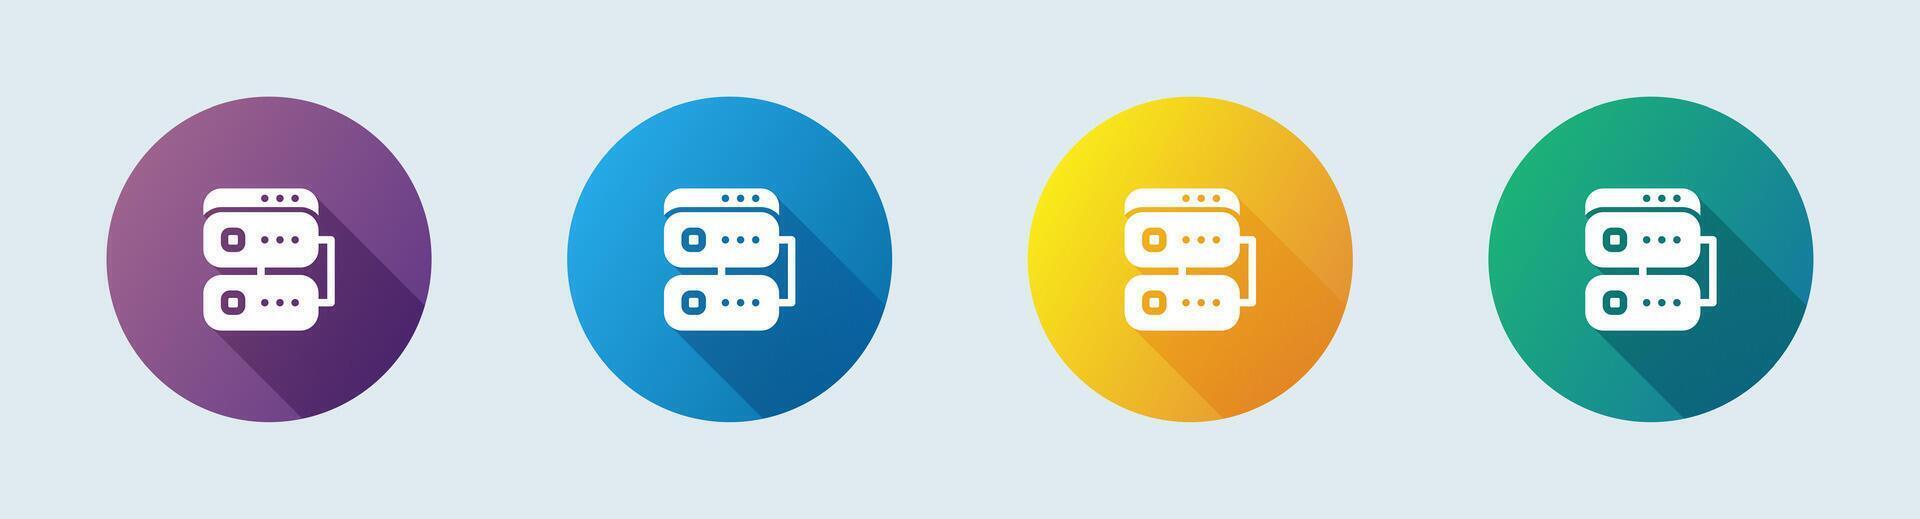 Database solid icon in flat design style. Server signs vector illustration.